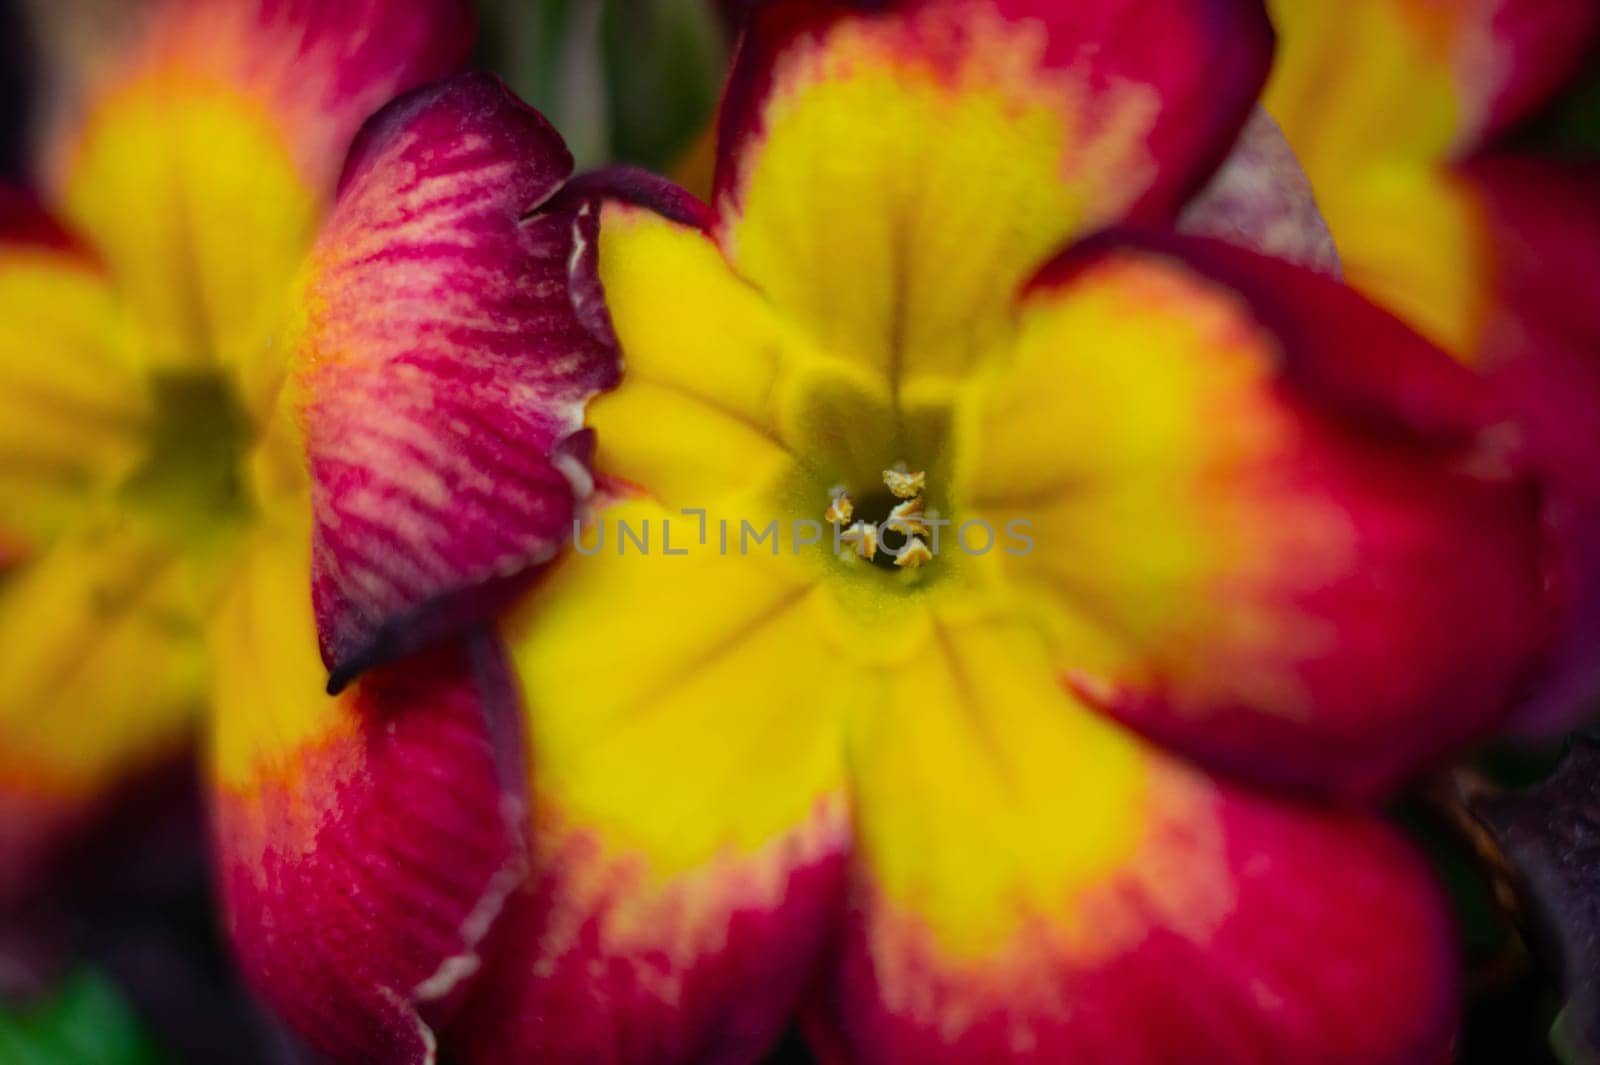 Red and yellow petunia flower close-up. Floral background.